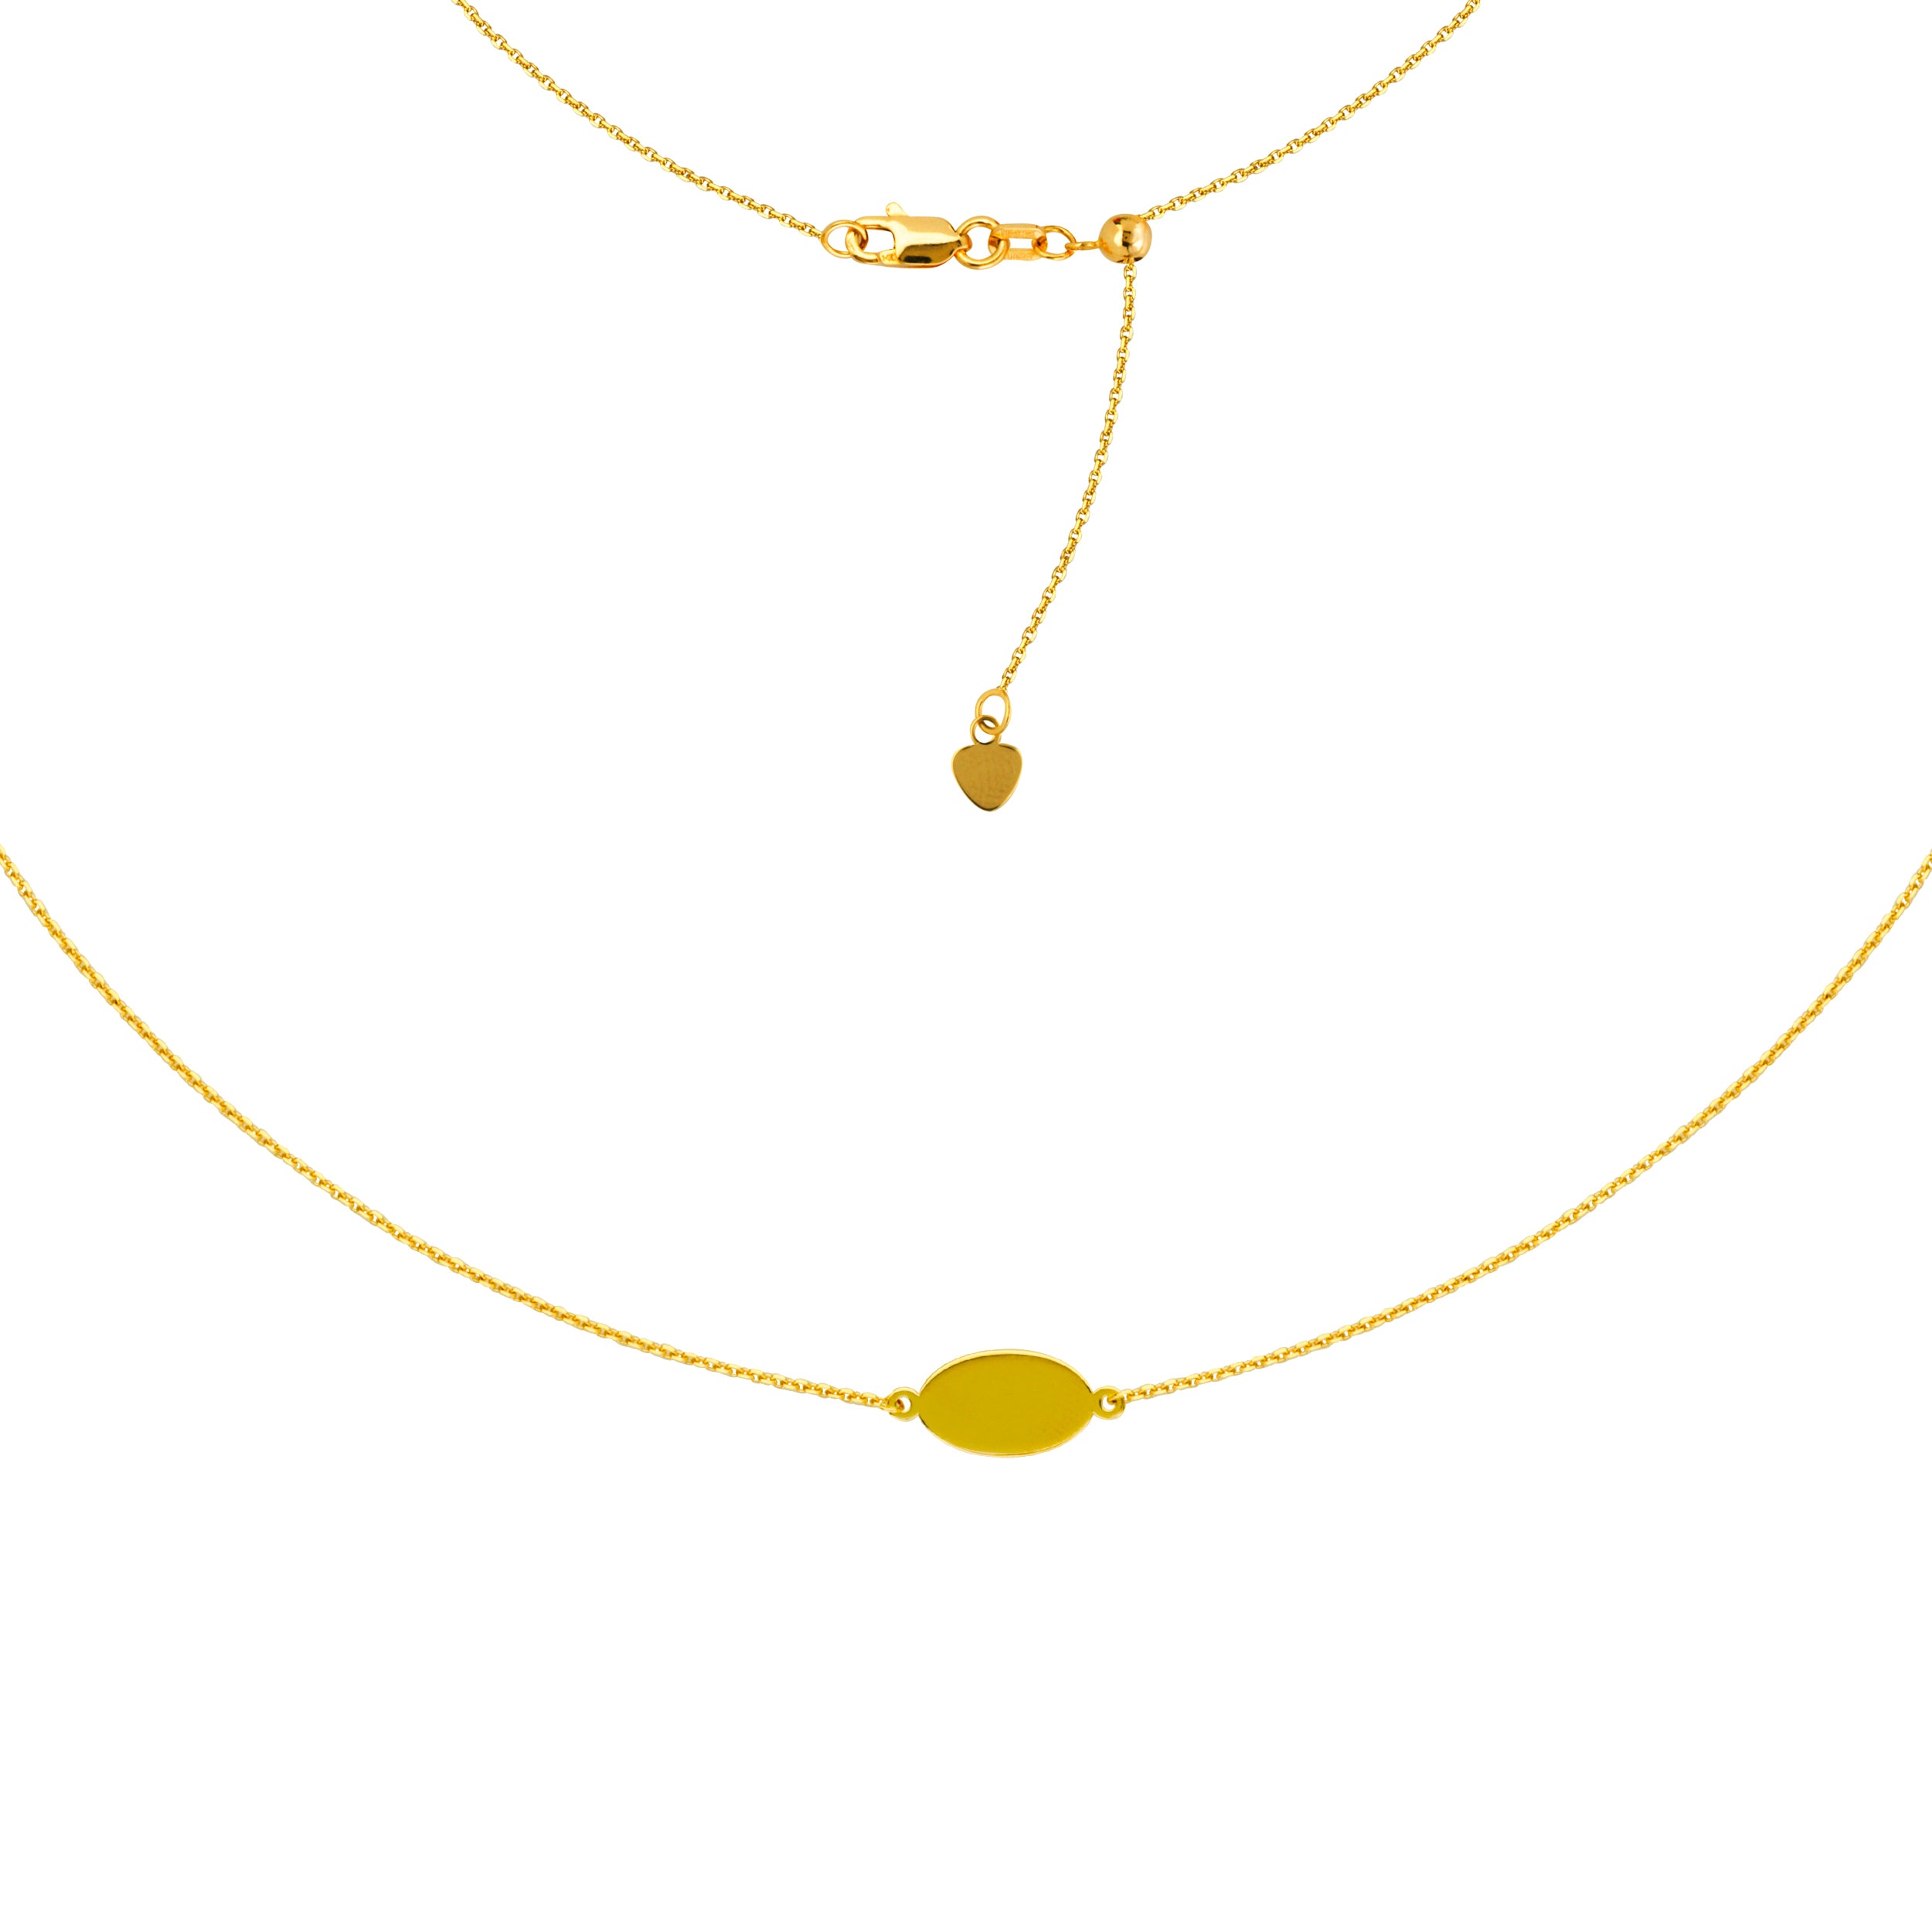 Mini Engravable Oval Plate Choker 14k Yellow Gold Necklace, 16" Adjustable fine designer jewelry for men and women